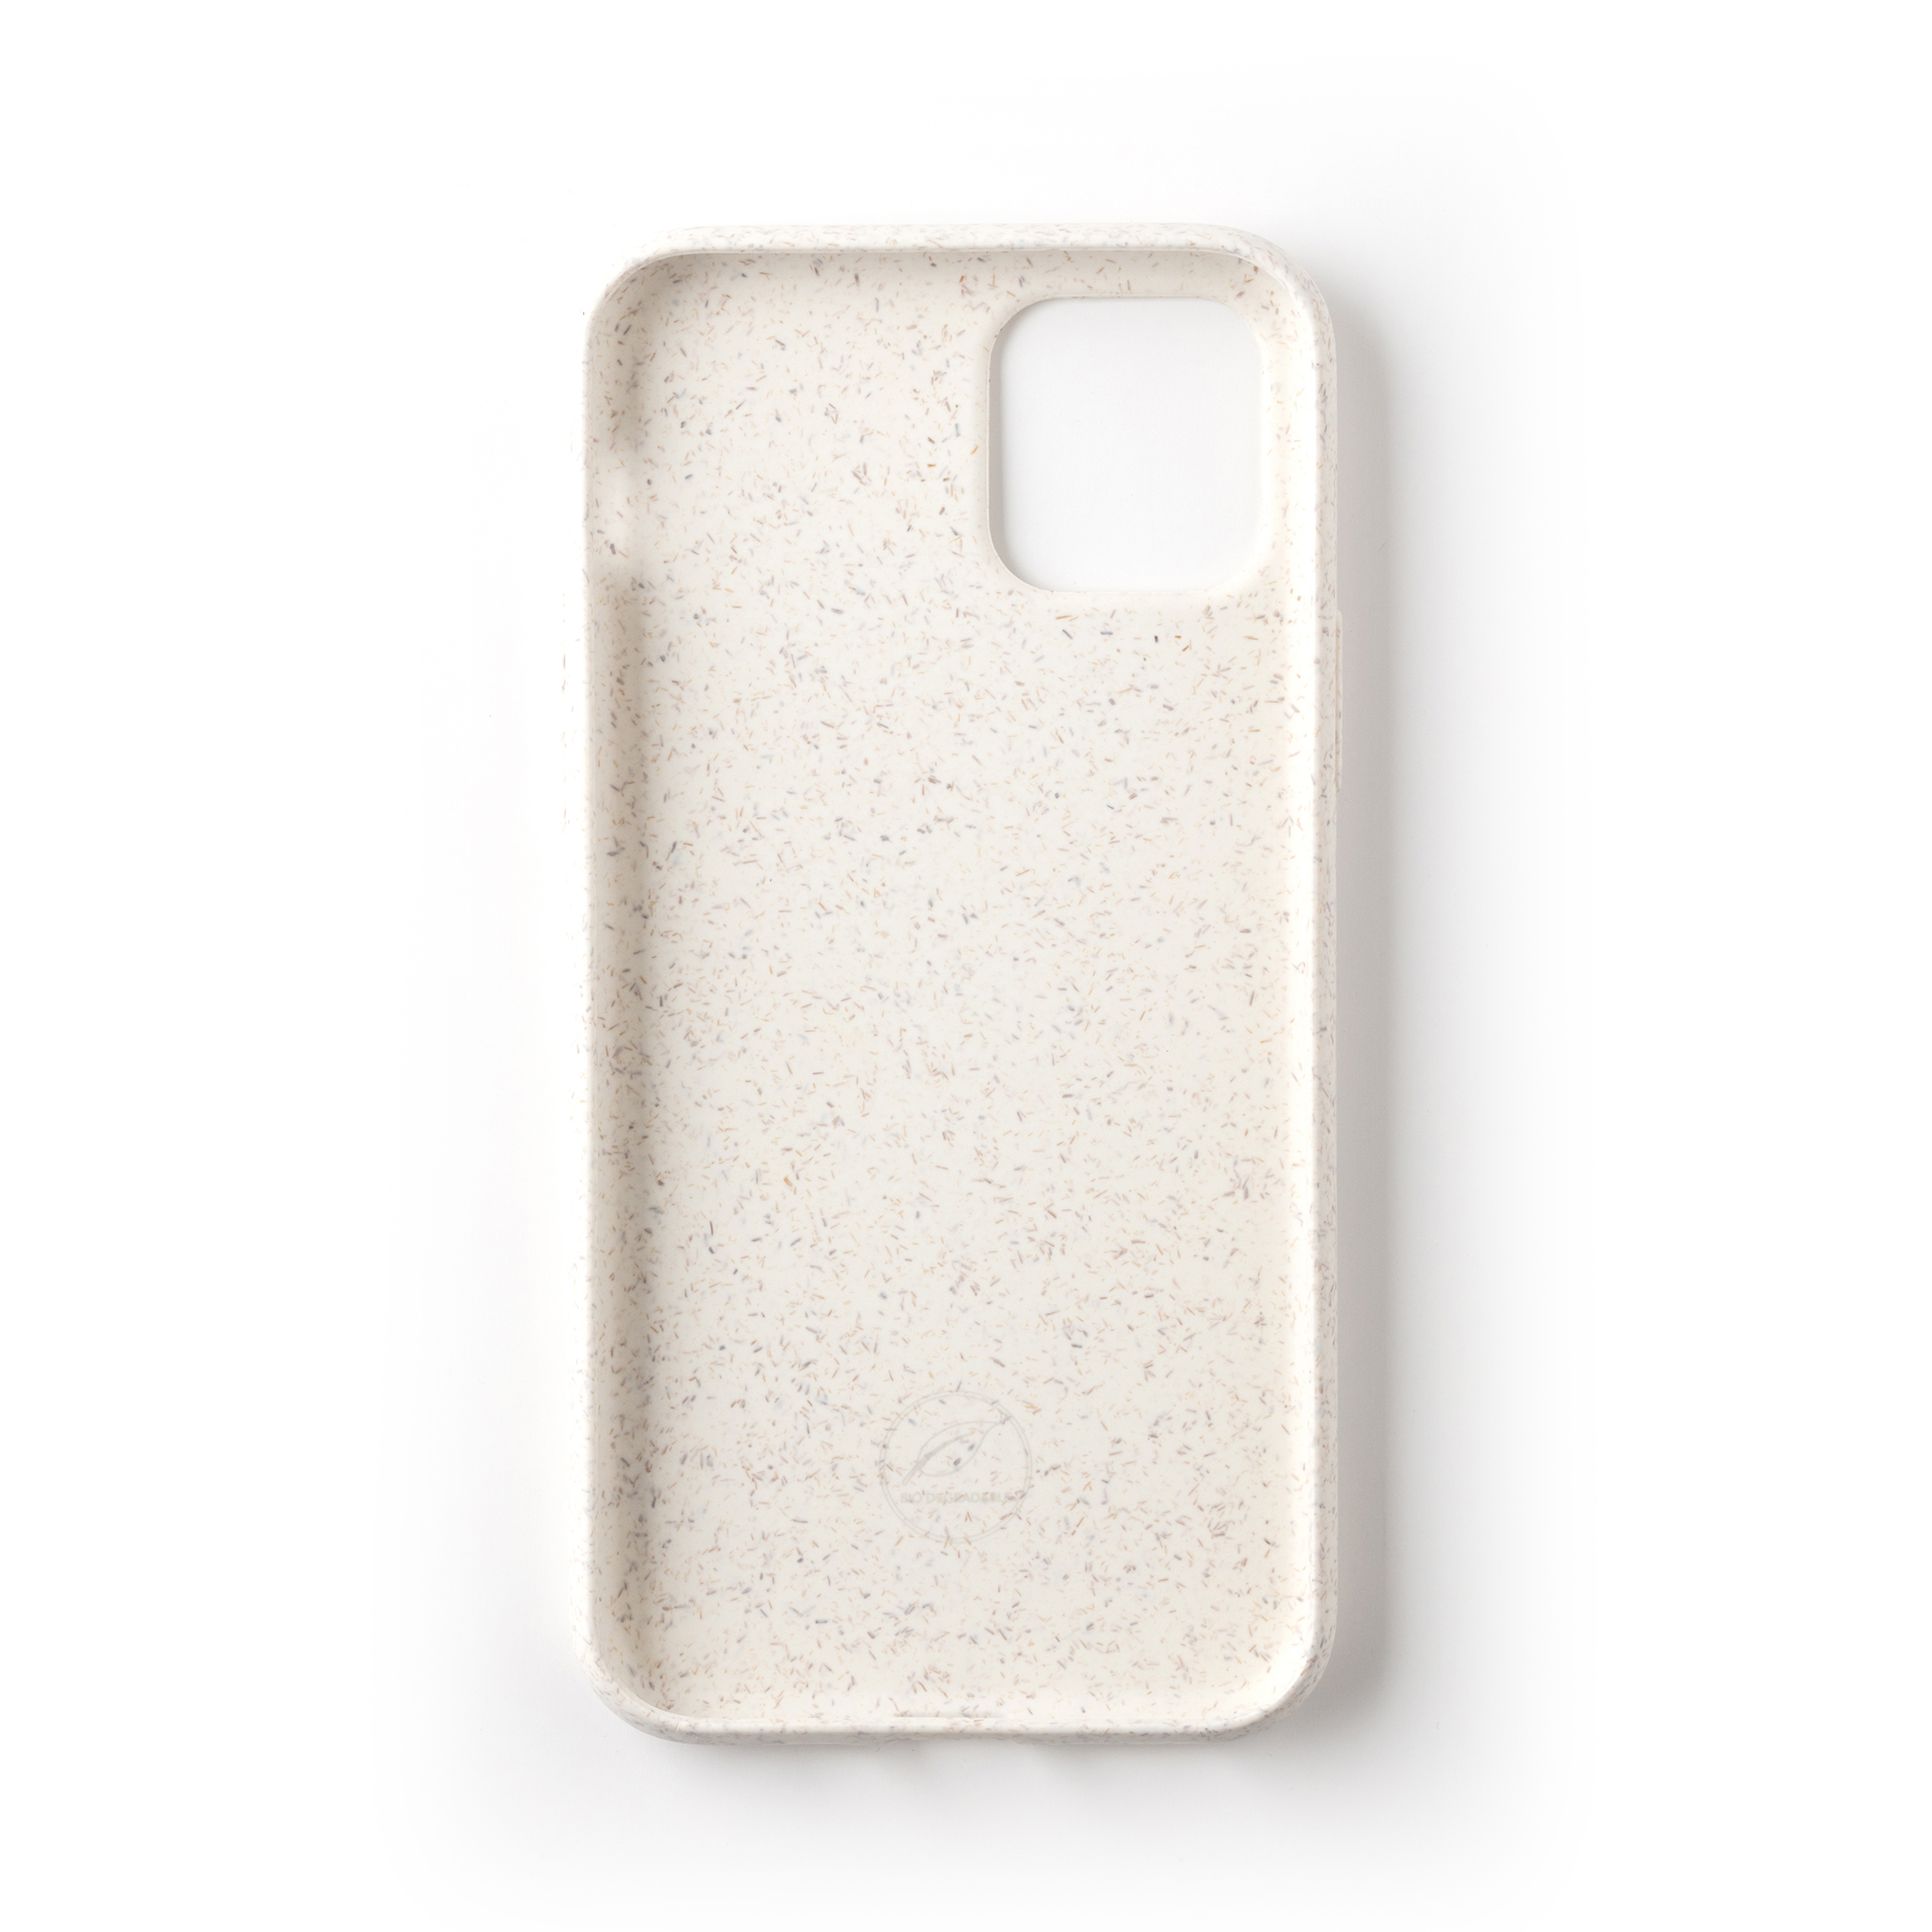 Apple, ECO iPhone Backcover, white WILMA FASHION 11 PRO, RIP11, BY